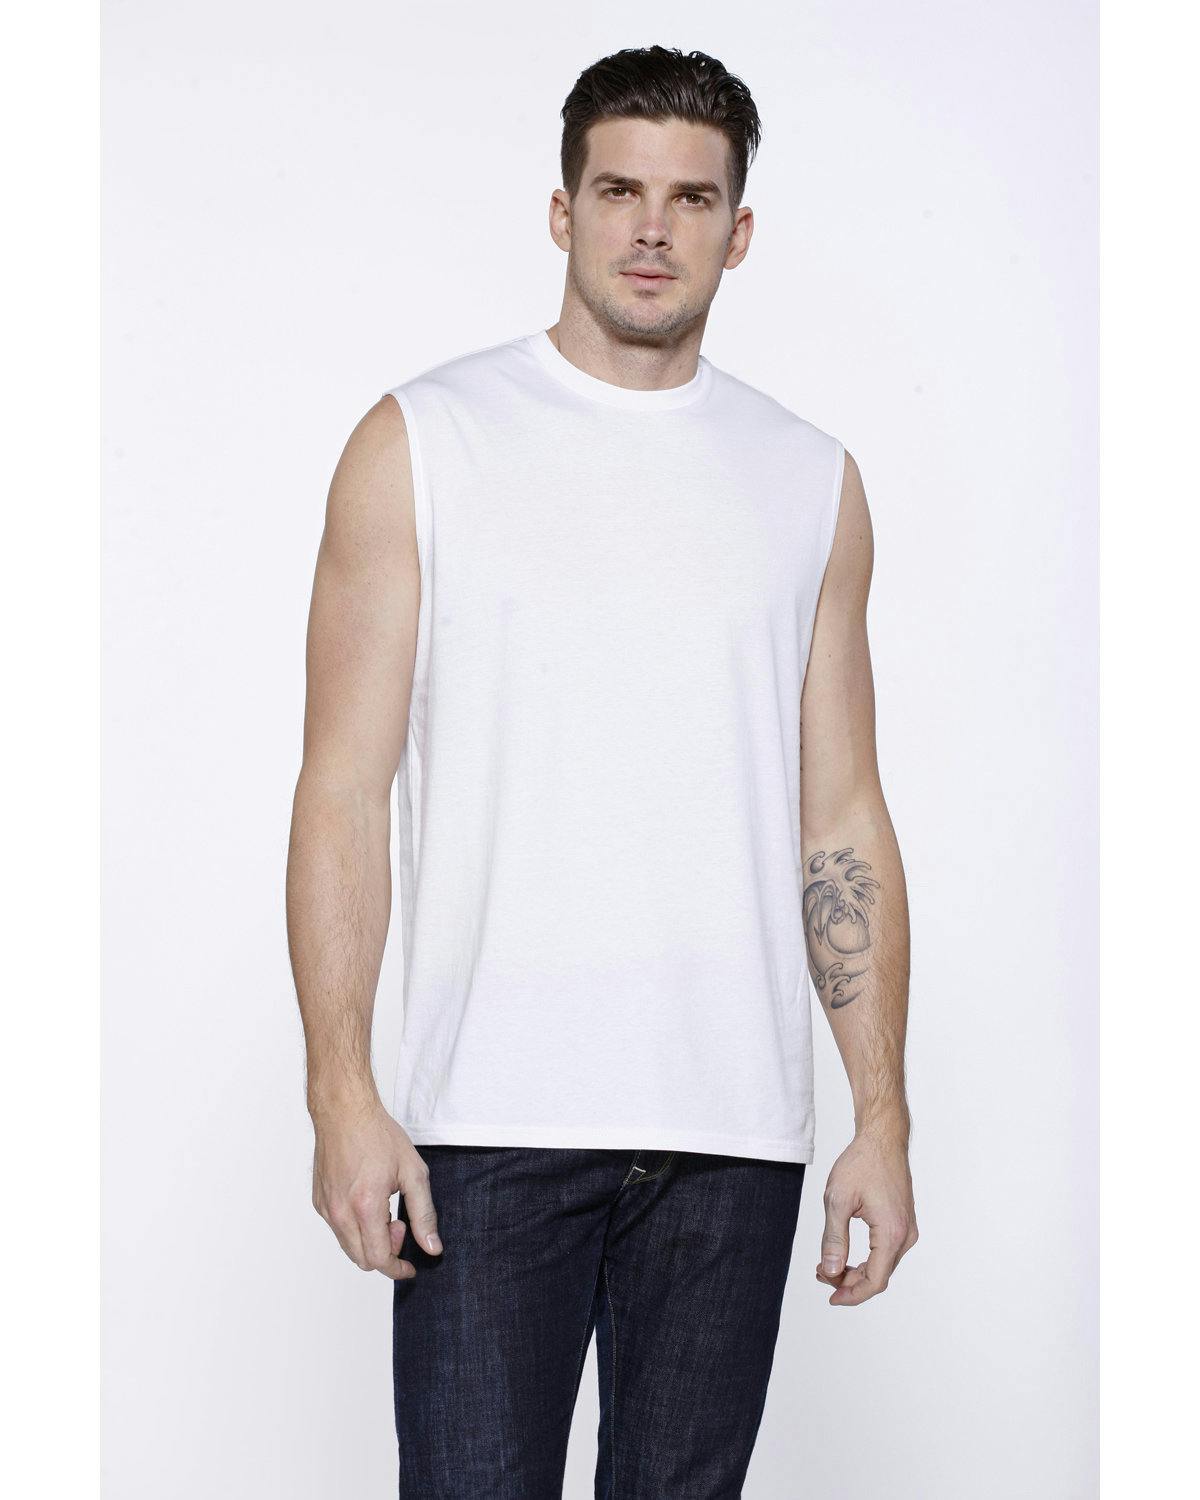 Image for Men's Muscle T-Shirt